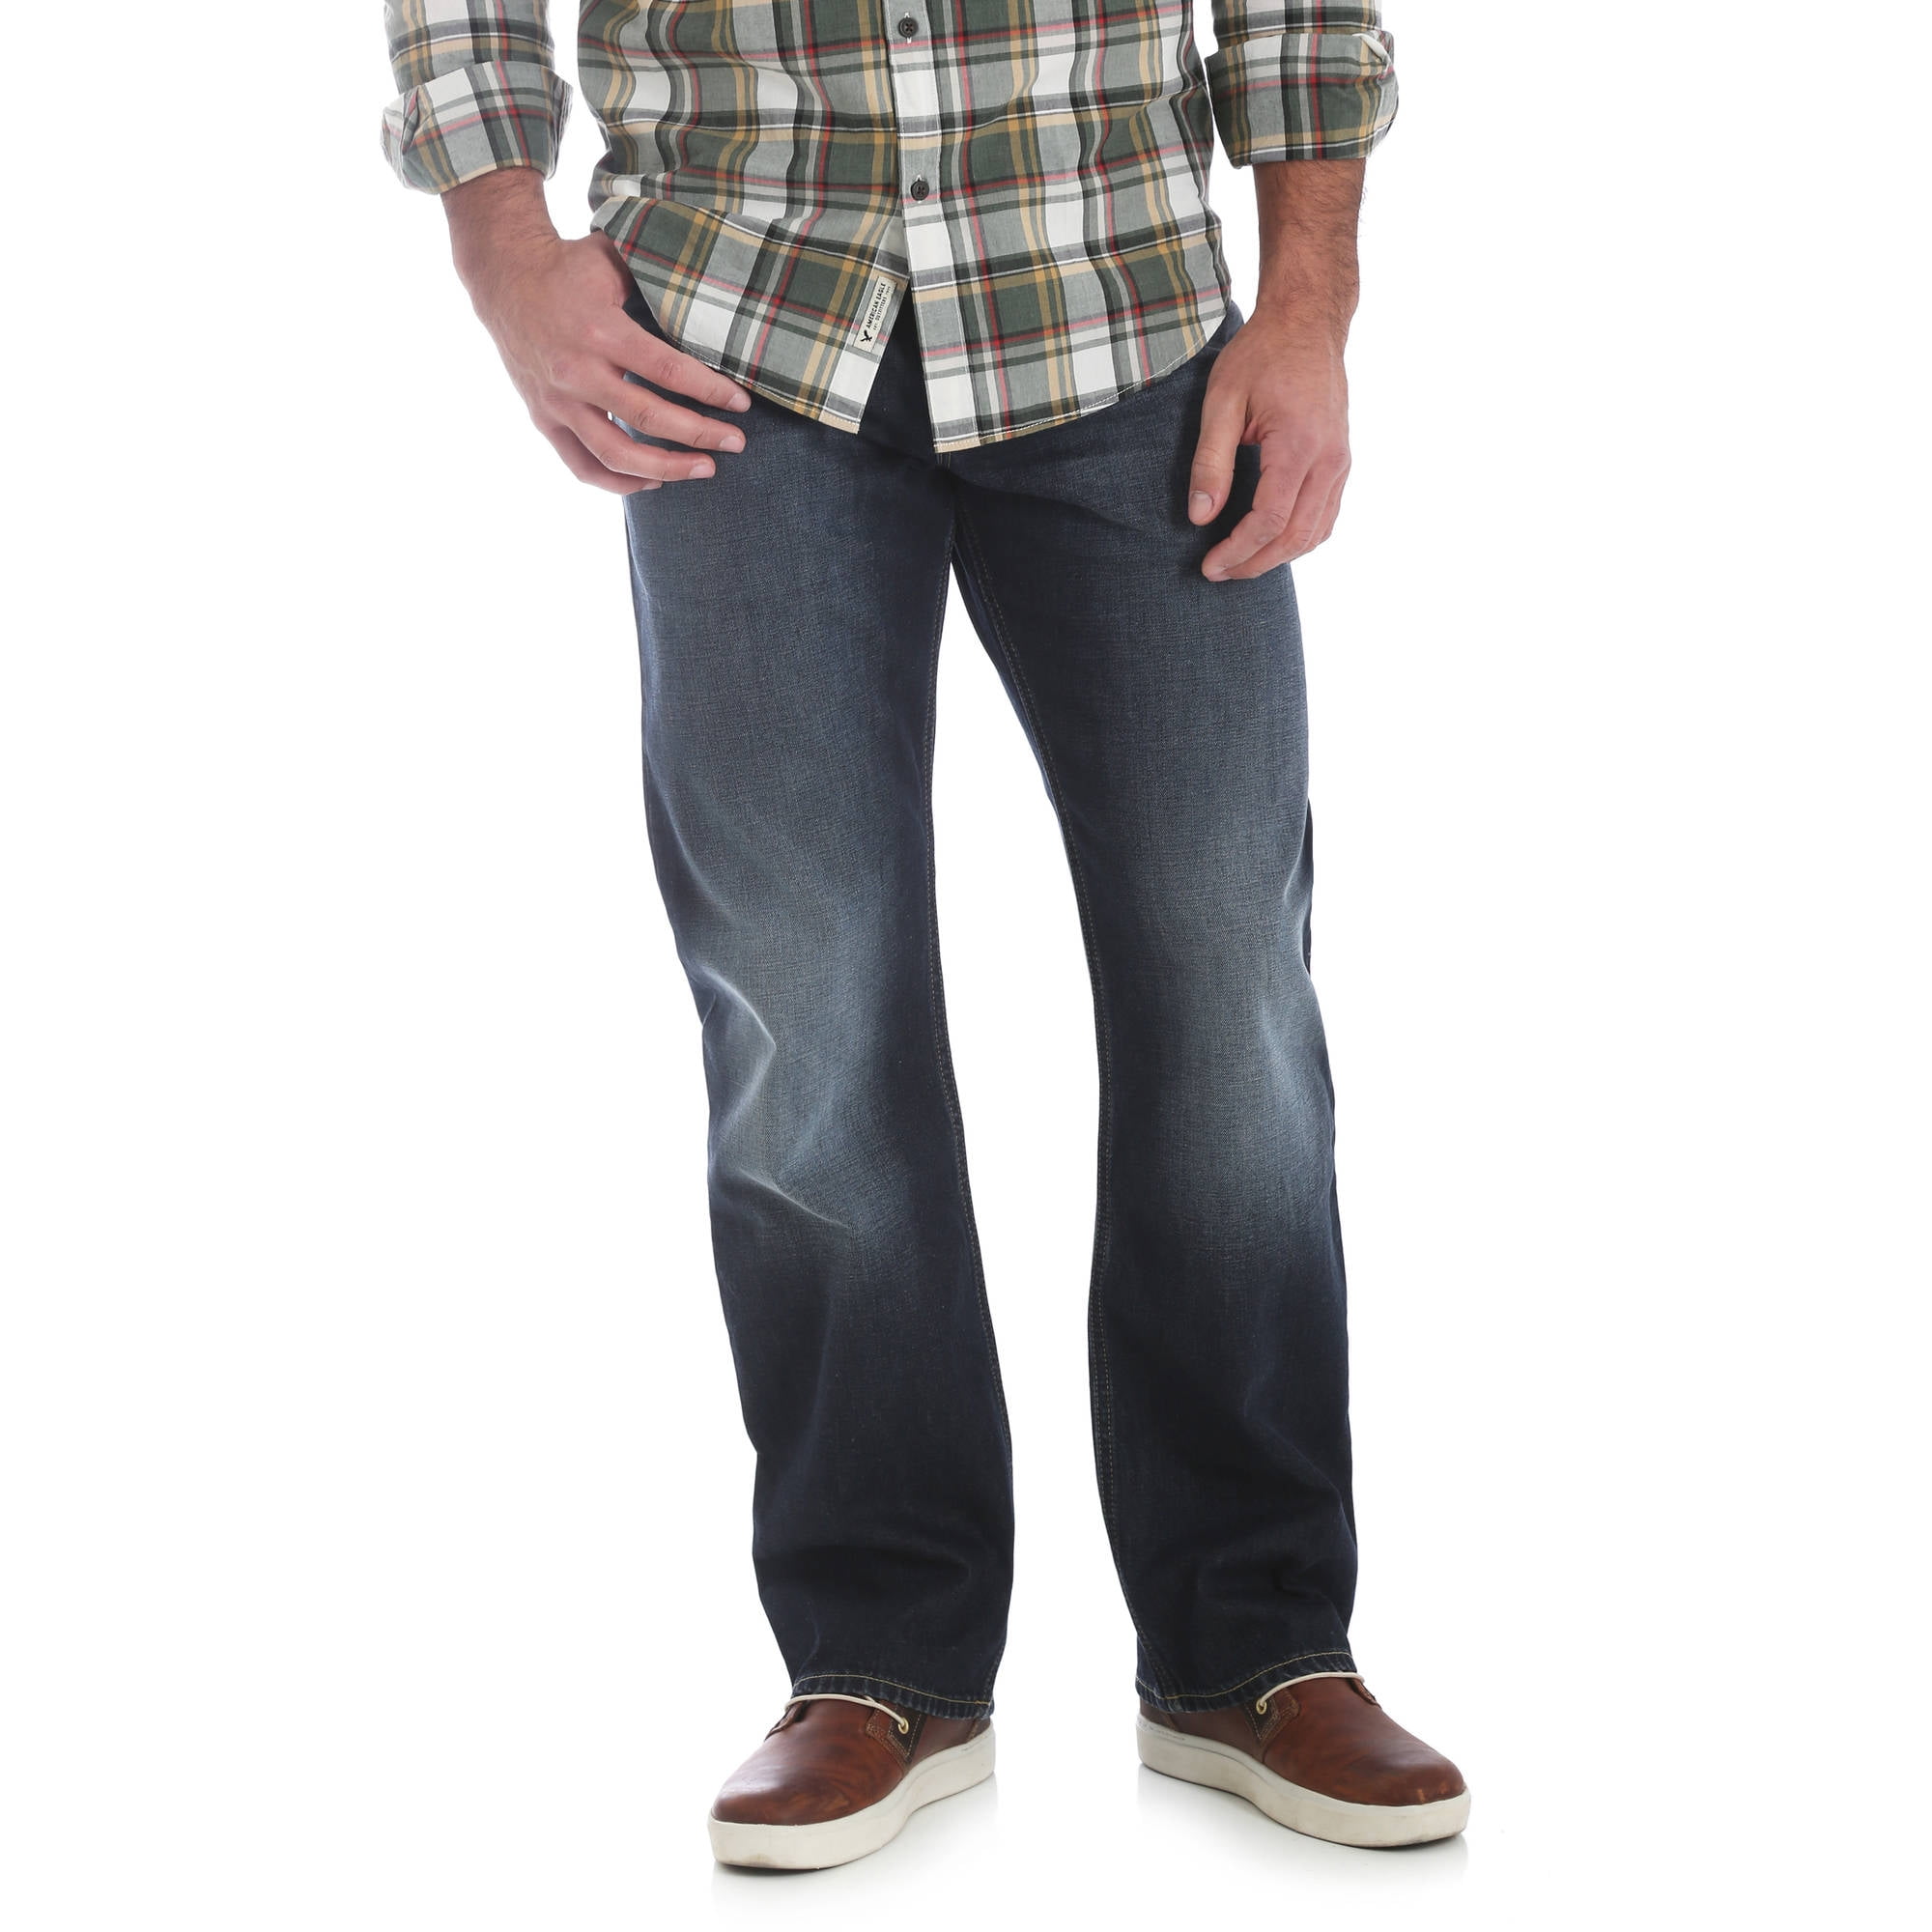 Wrangler Men's Relaxed Bootcut Jean with Stretch - Walmart.com